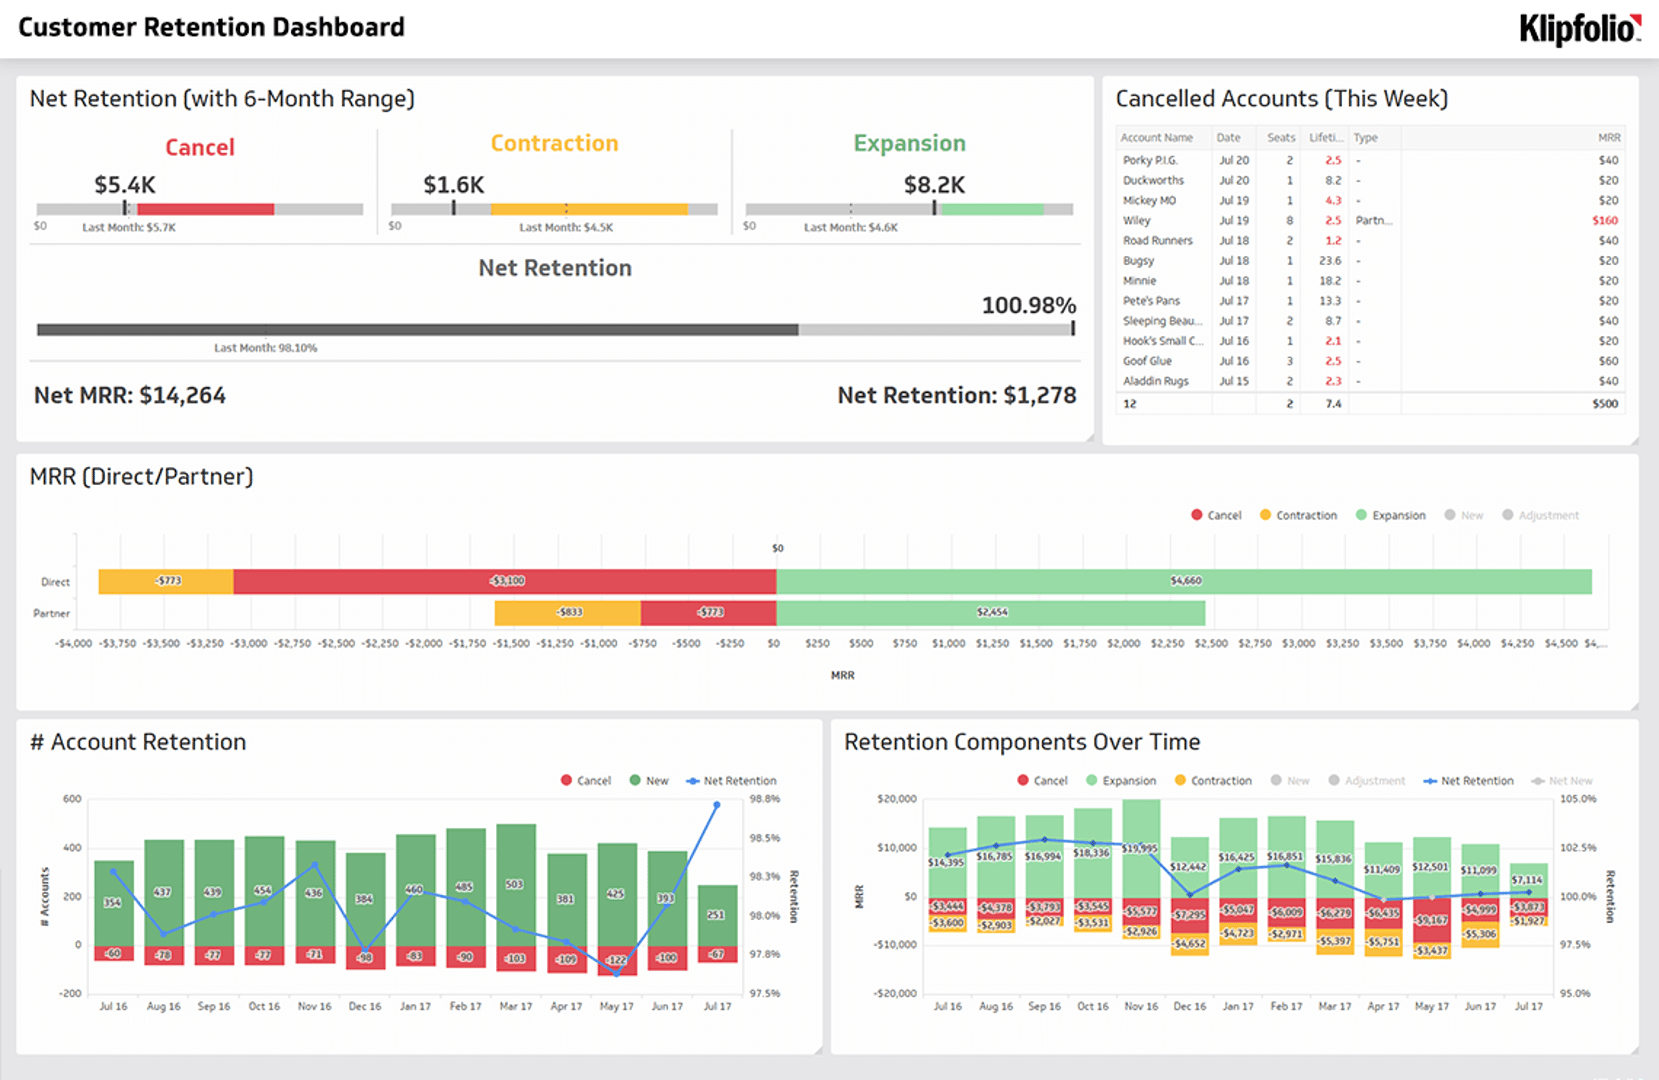 Related Dashboard Examples - Customer Retention Dashboard